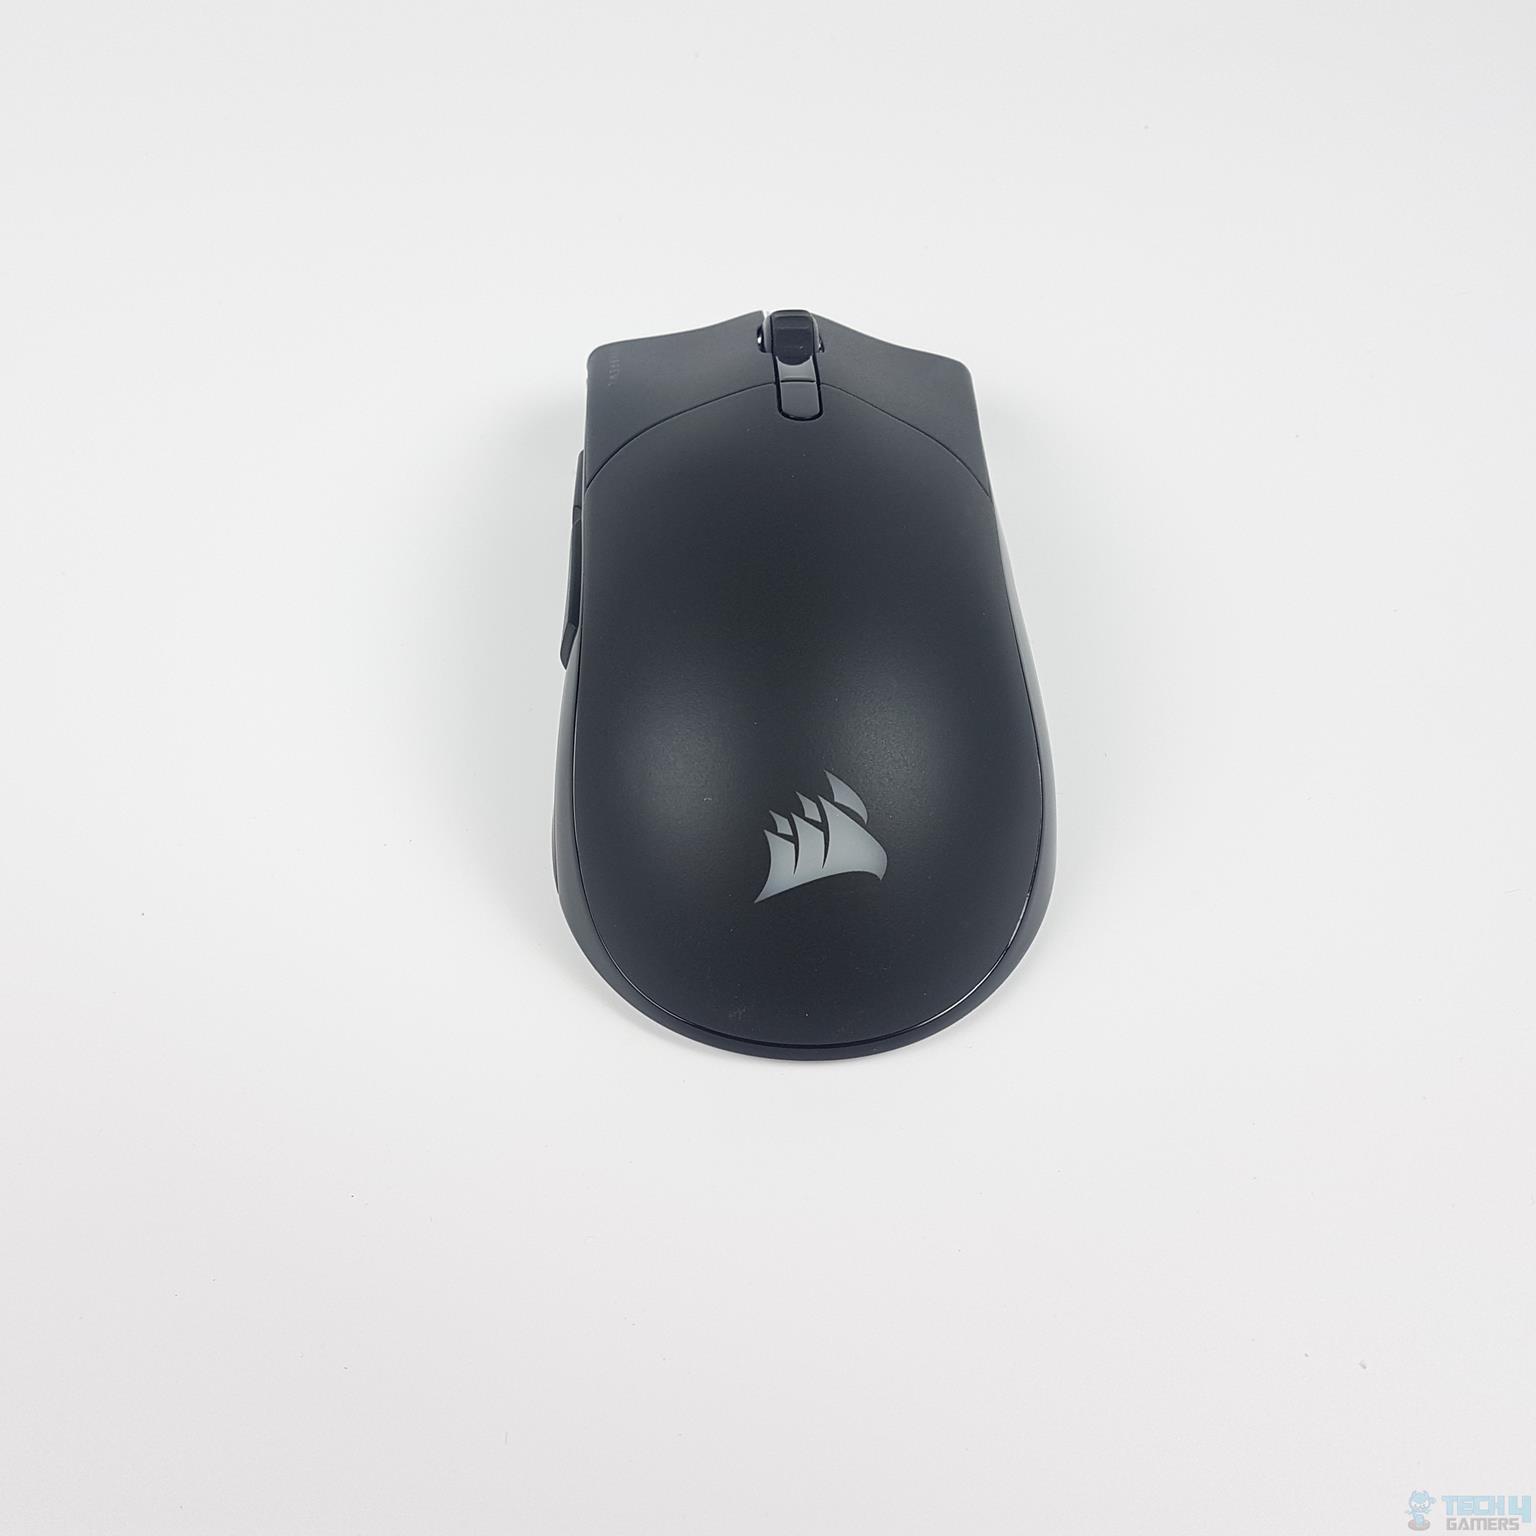 CORSAIR Sabre RGB Pro Wireless Gaming Mouse — The backside of the mouse